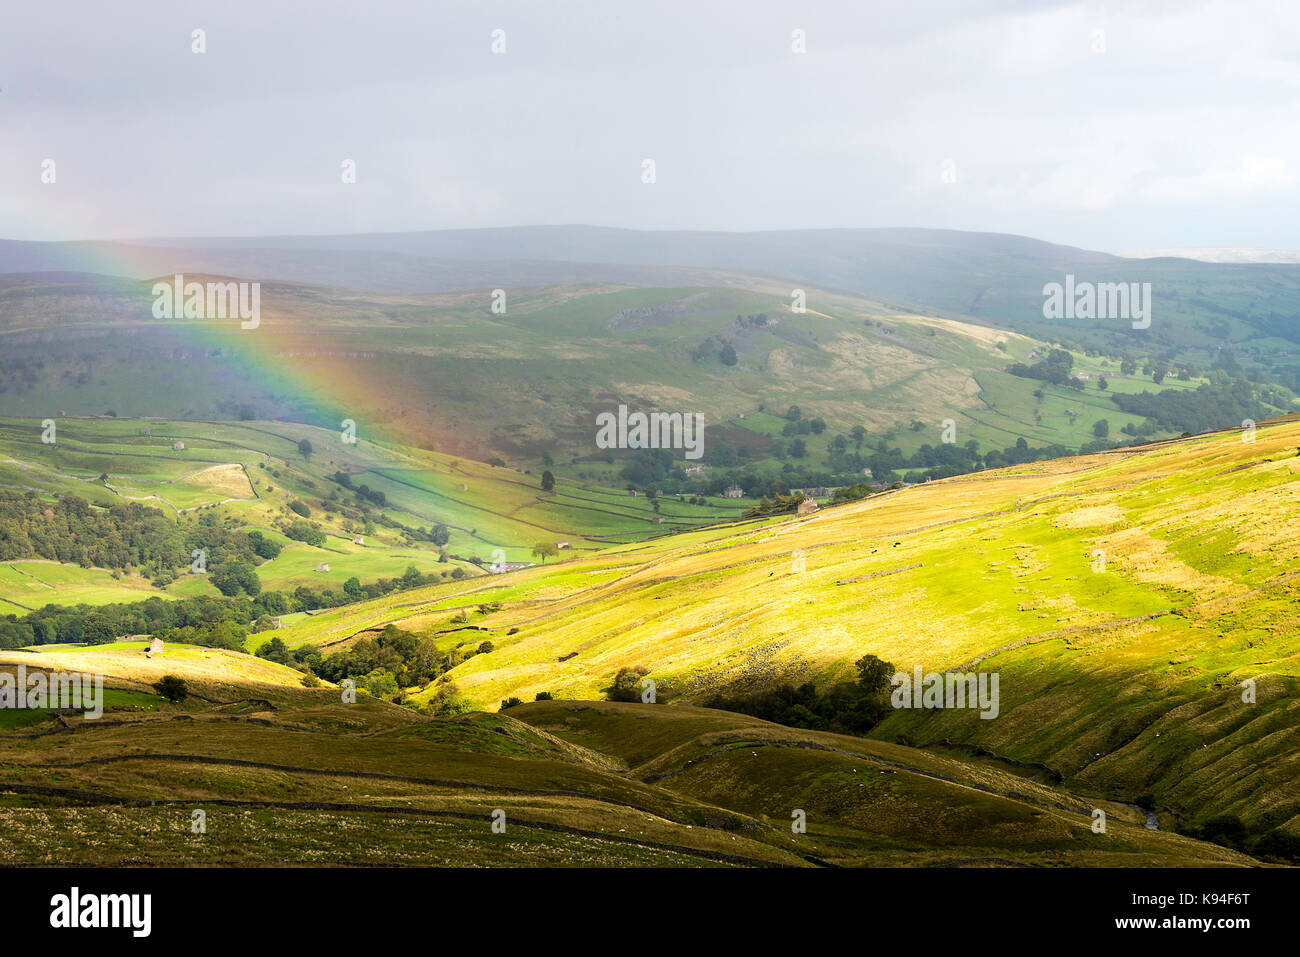 A Beautiful Rainbow Curves Over Remote Moorland in Swaledale near Muker Yorkshire Dales National Park Yorkshire England United Kingdom UK Stock Photo